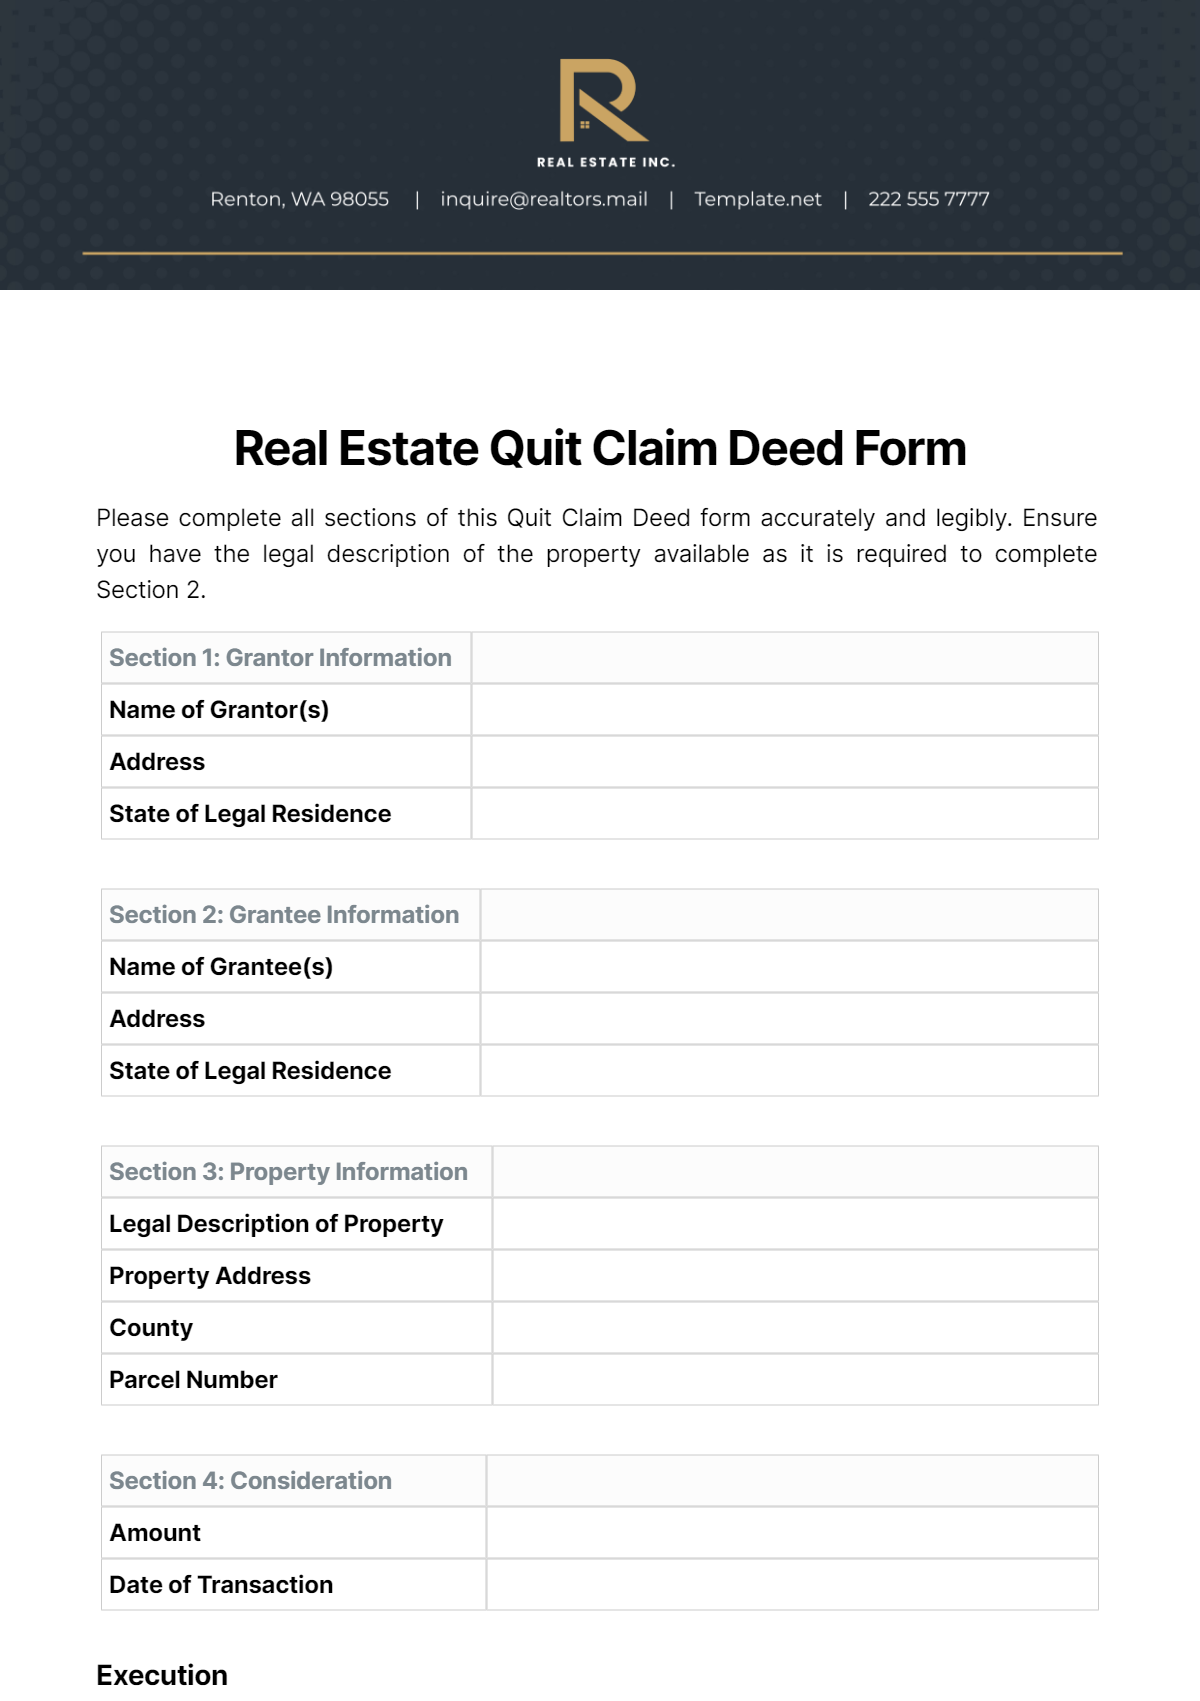 Real Estate Quit Claim Deed Form Template